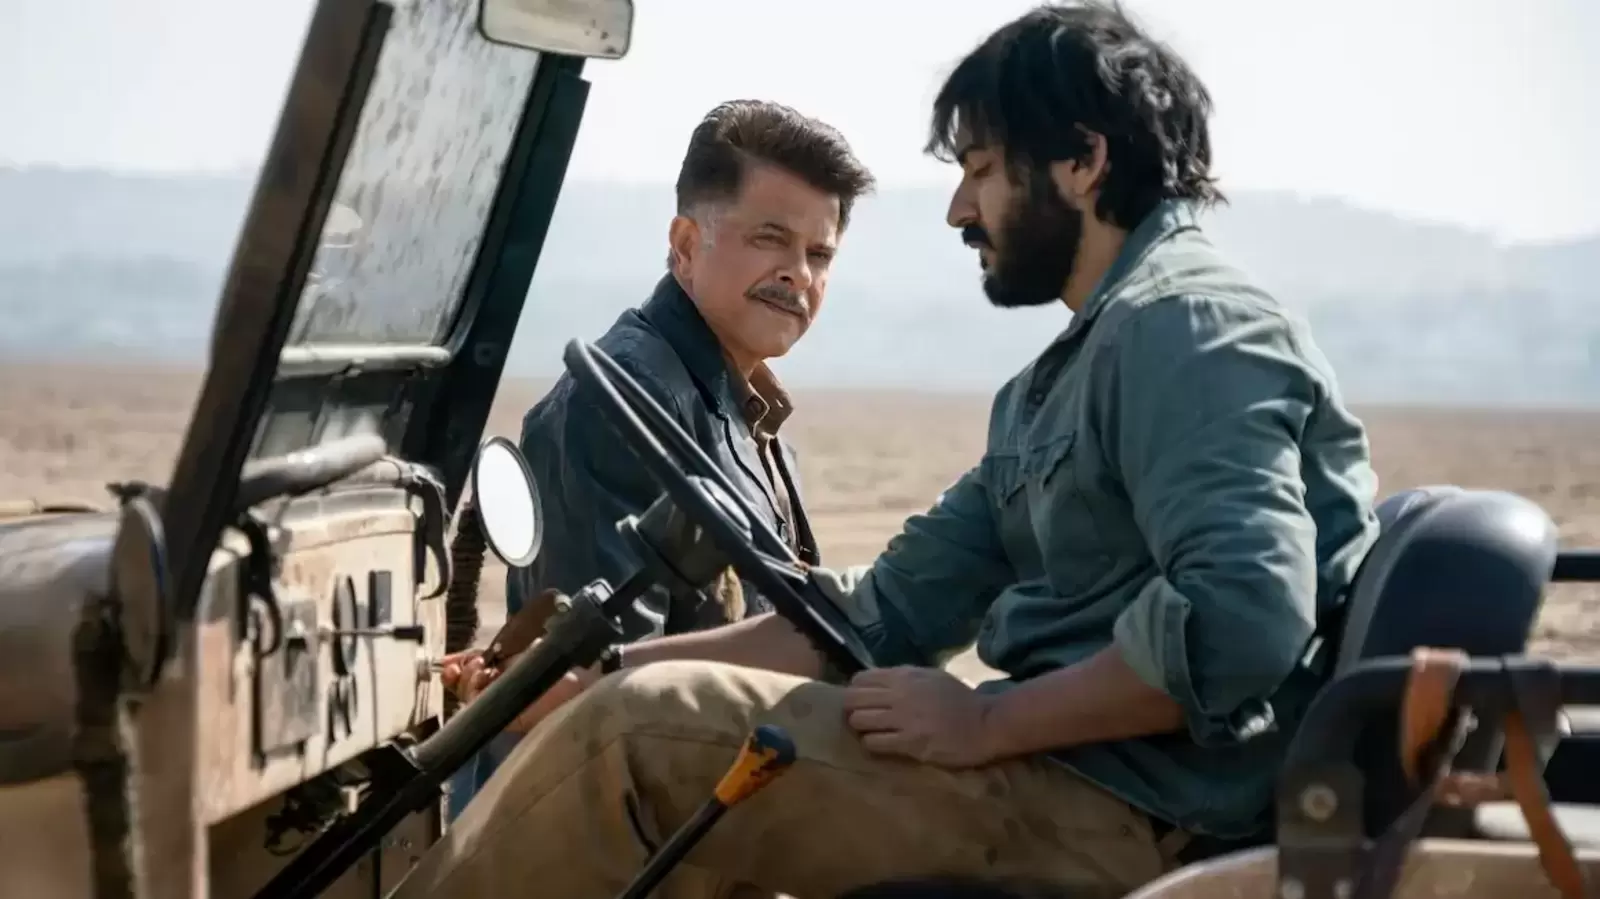 Thar movie review: Anil Kapoor outshines his protagonist son Harsh Varrdhan in this Saw sequel masquerading as a Western